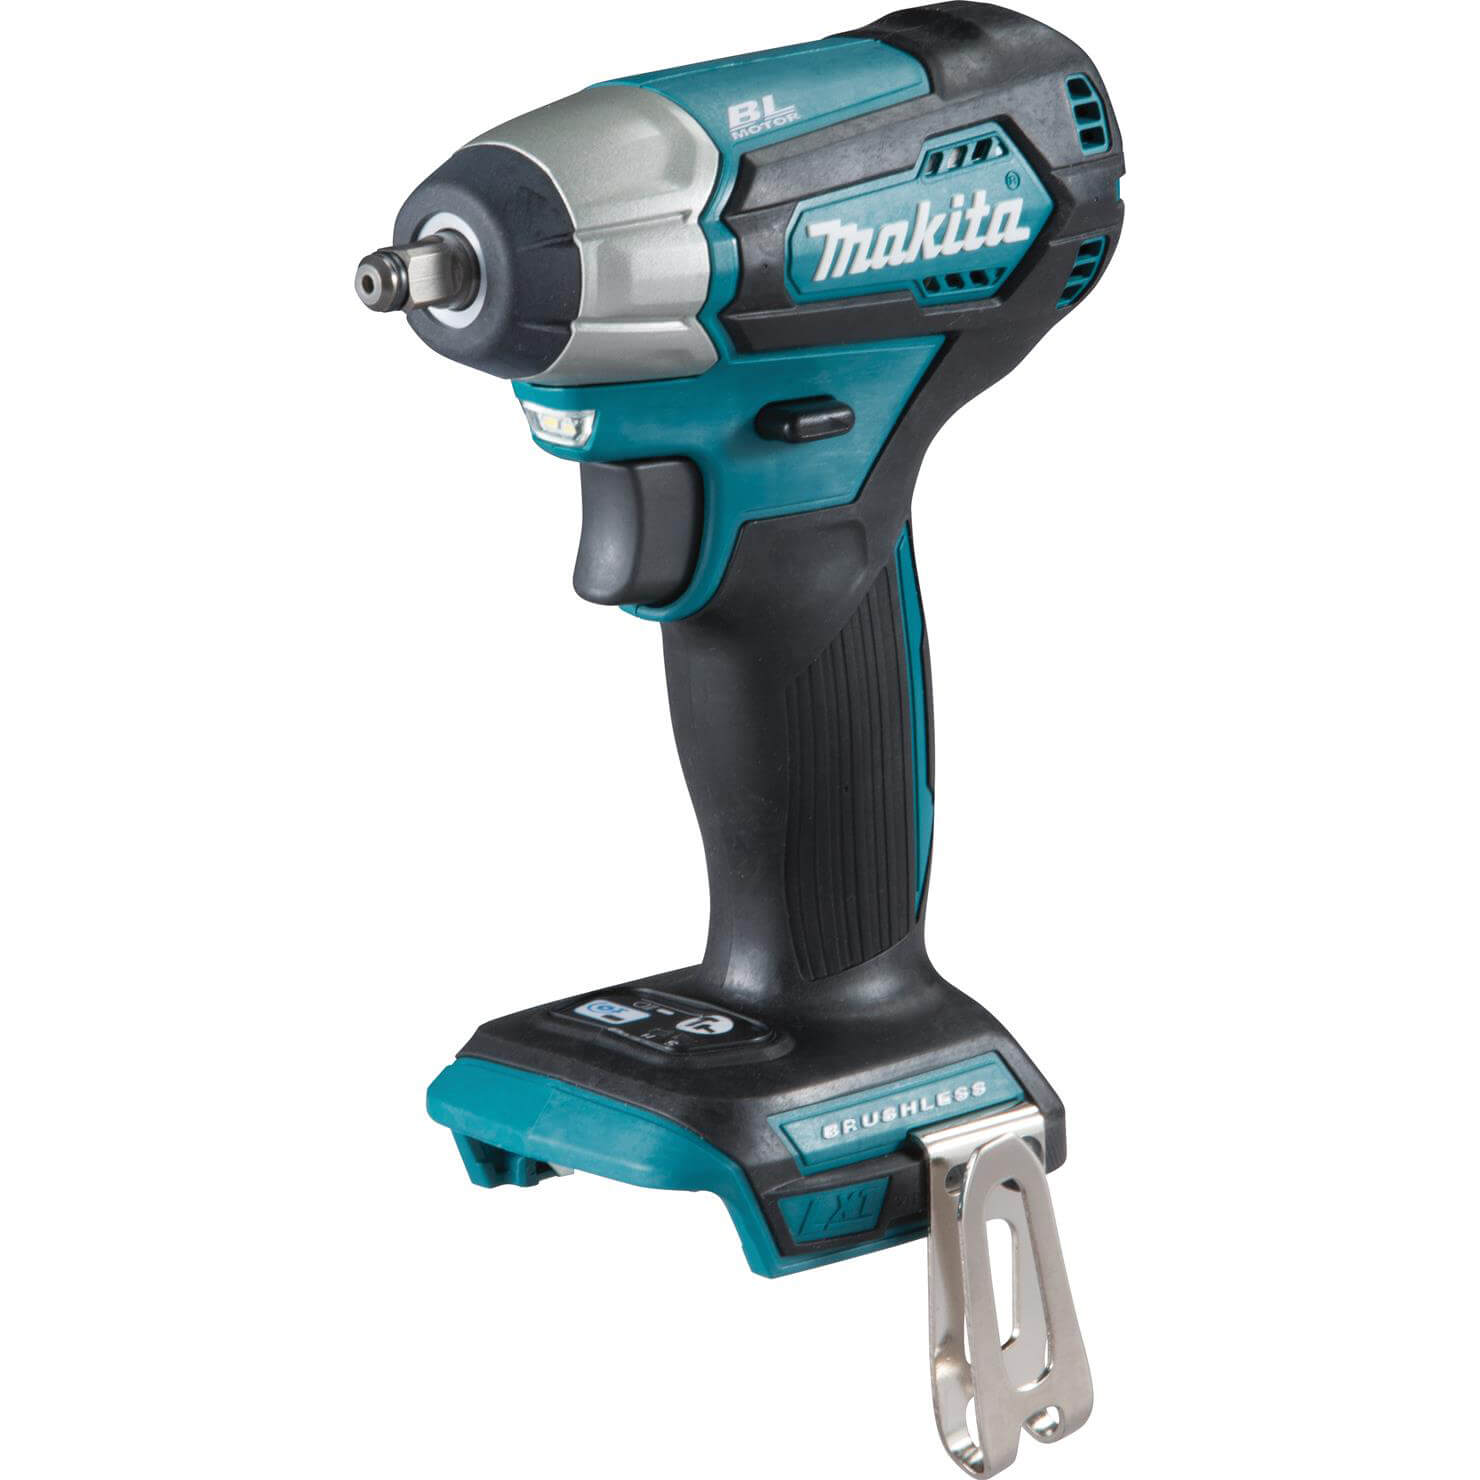 Image of Makita DTW180 18v LXT Cordless Brushless 3/8" Drive Impact Wrench No Batteries No Charger No Case